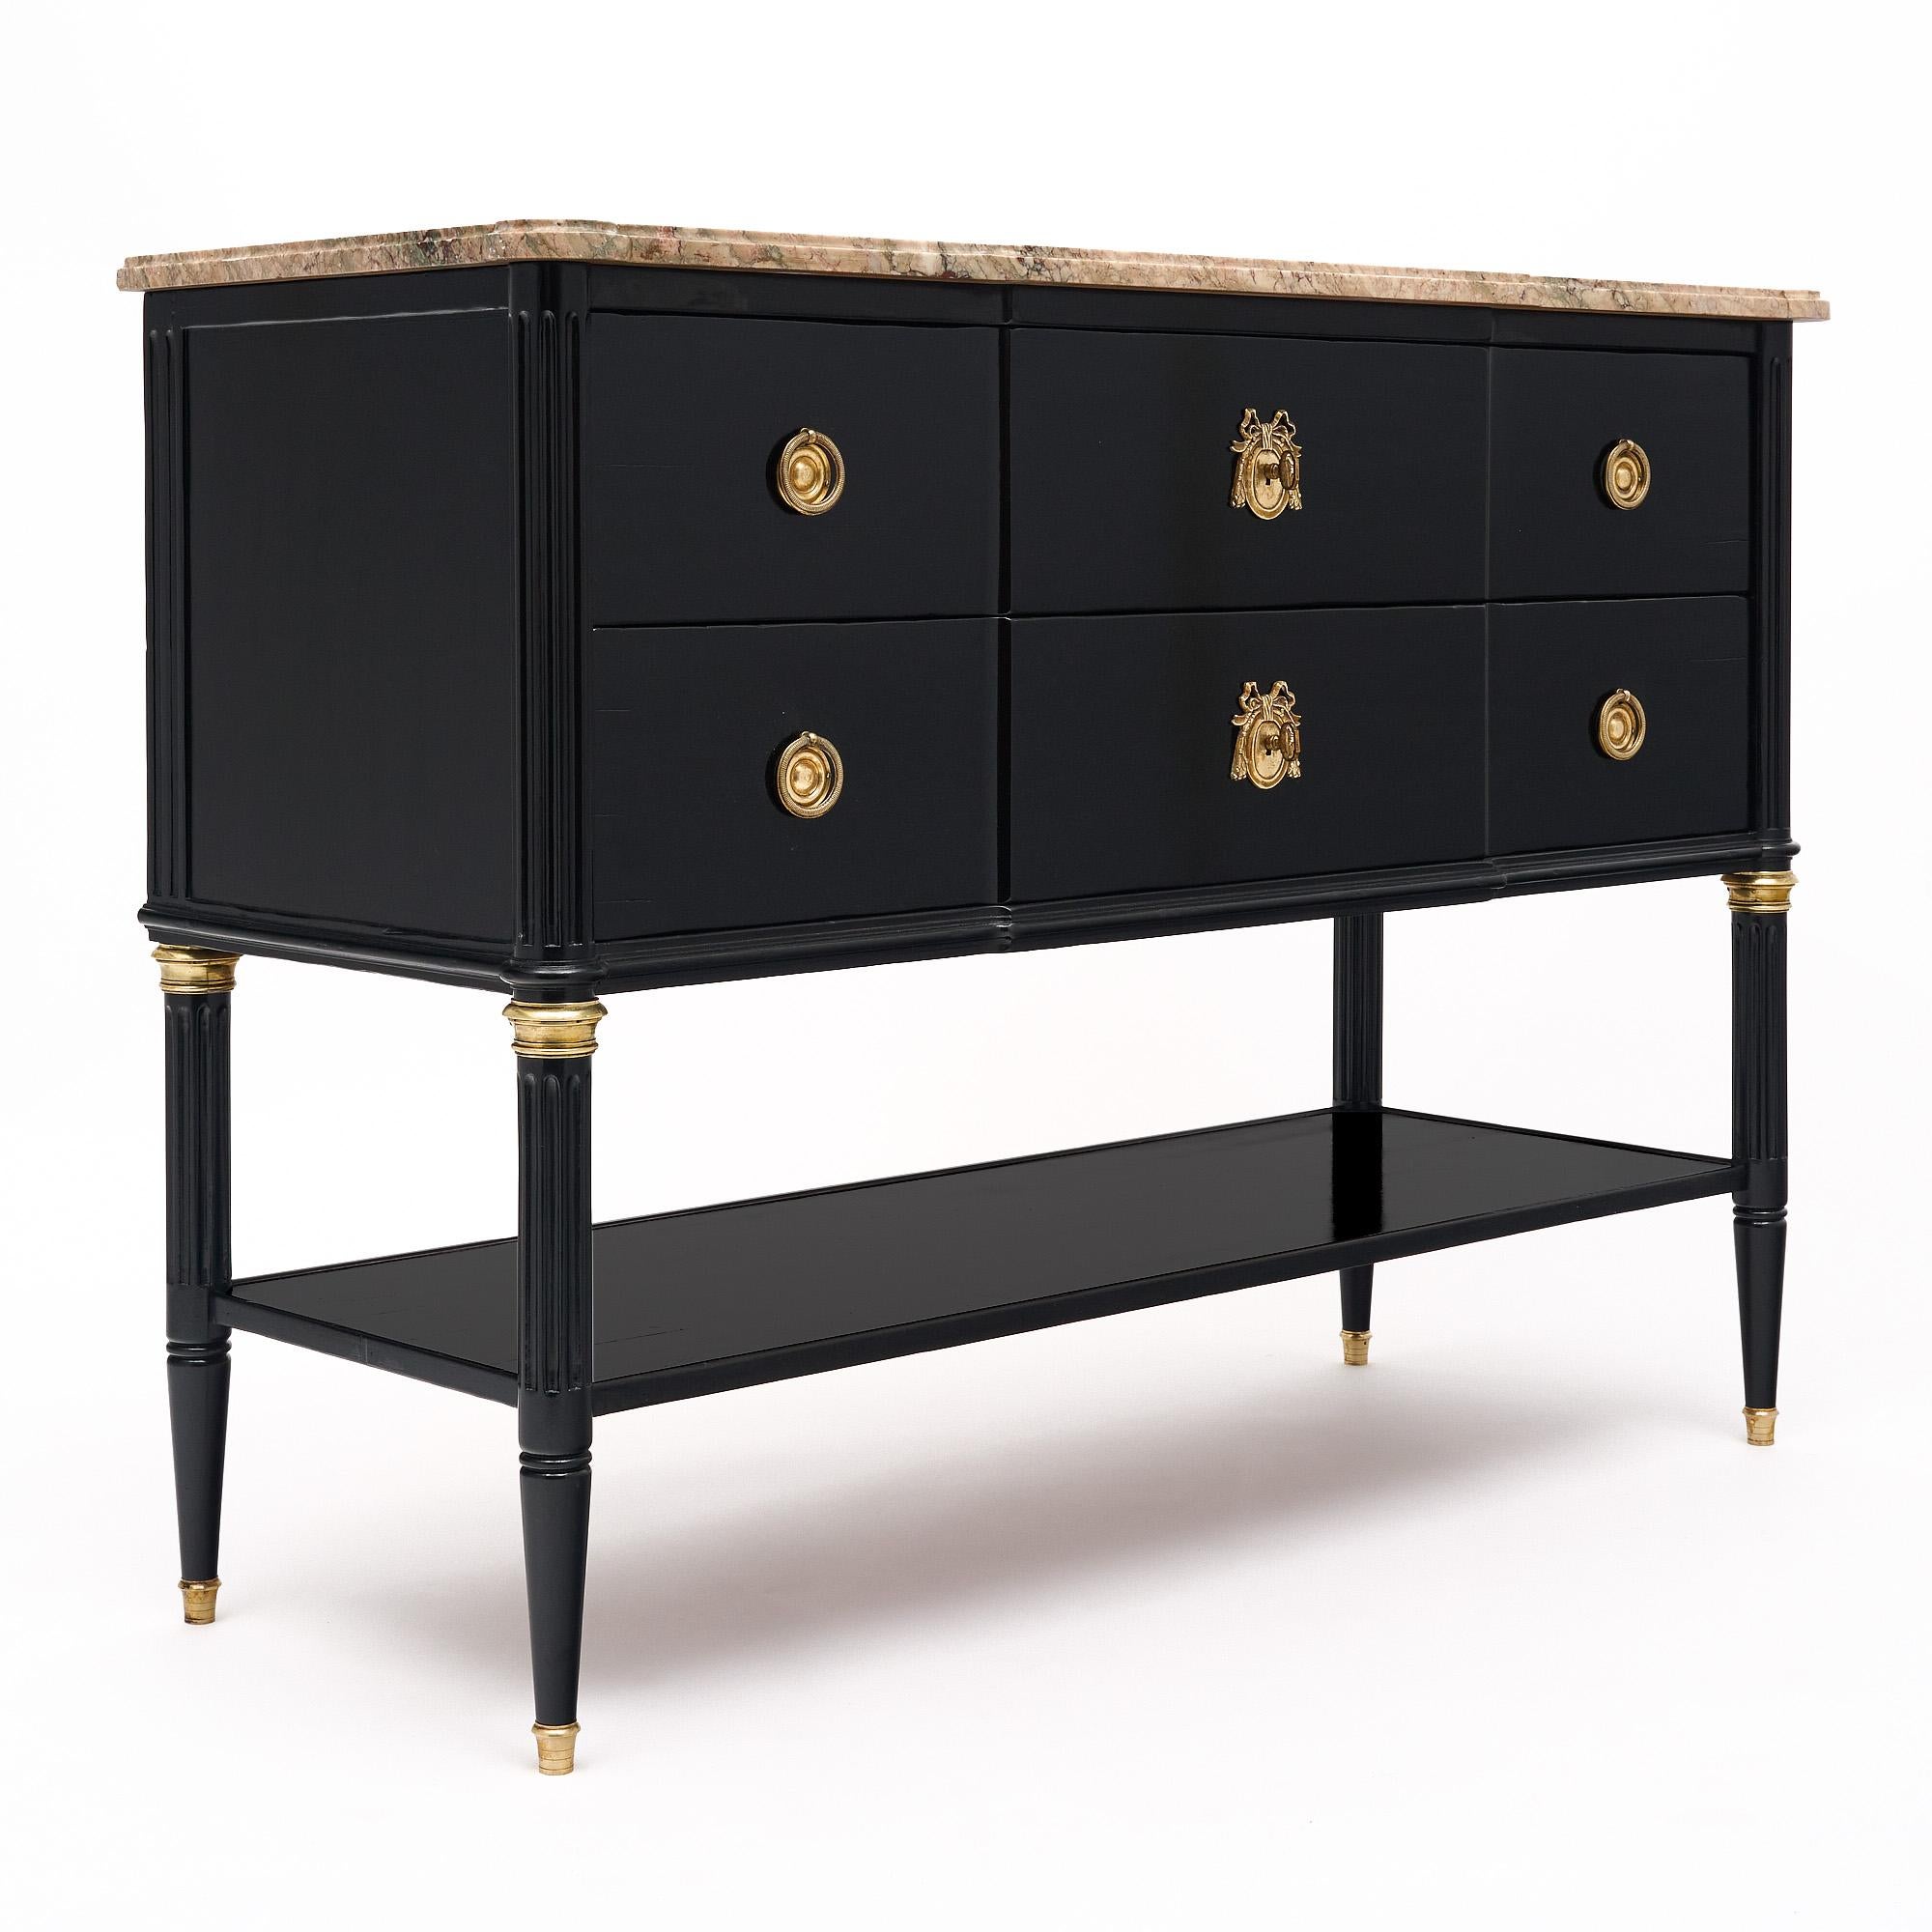 Chest or console case piece from France in the Louis XVI style. This piece has been ebonized and finished with a lustrous French polish finish. There are two dovetailed drawers running the length of the piece above a lower shelf. The chest is